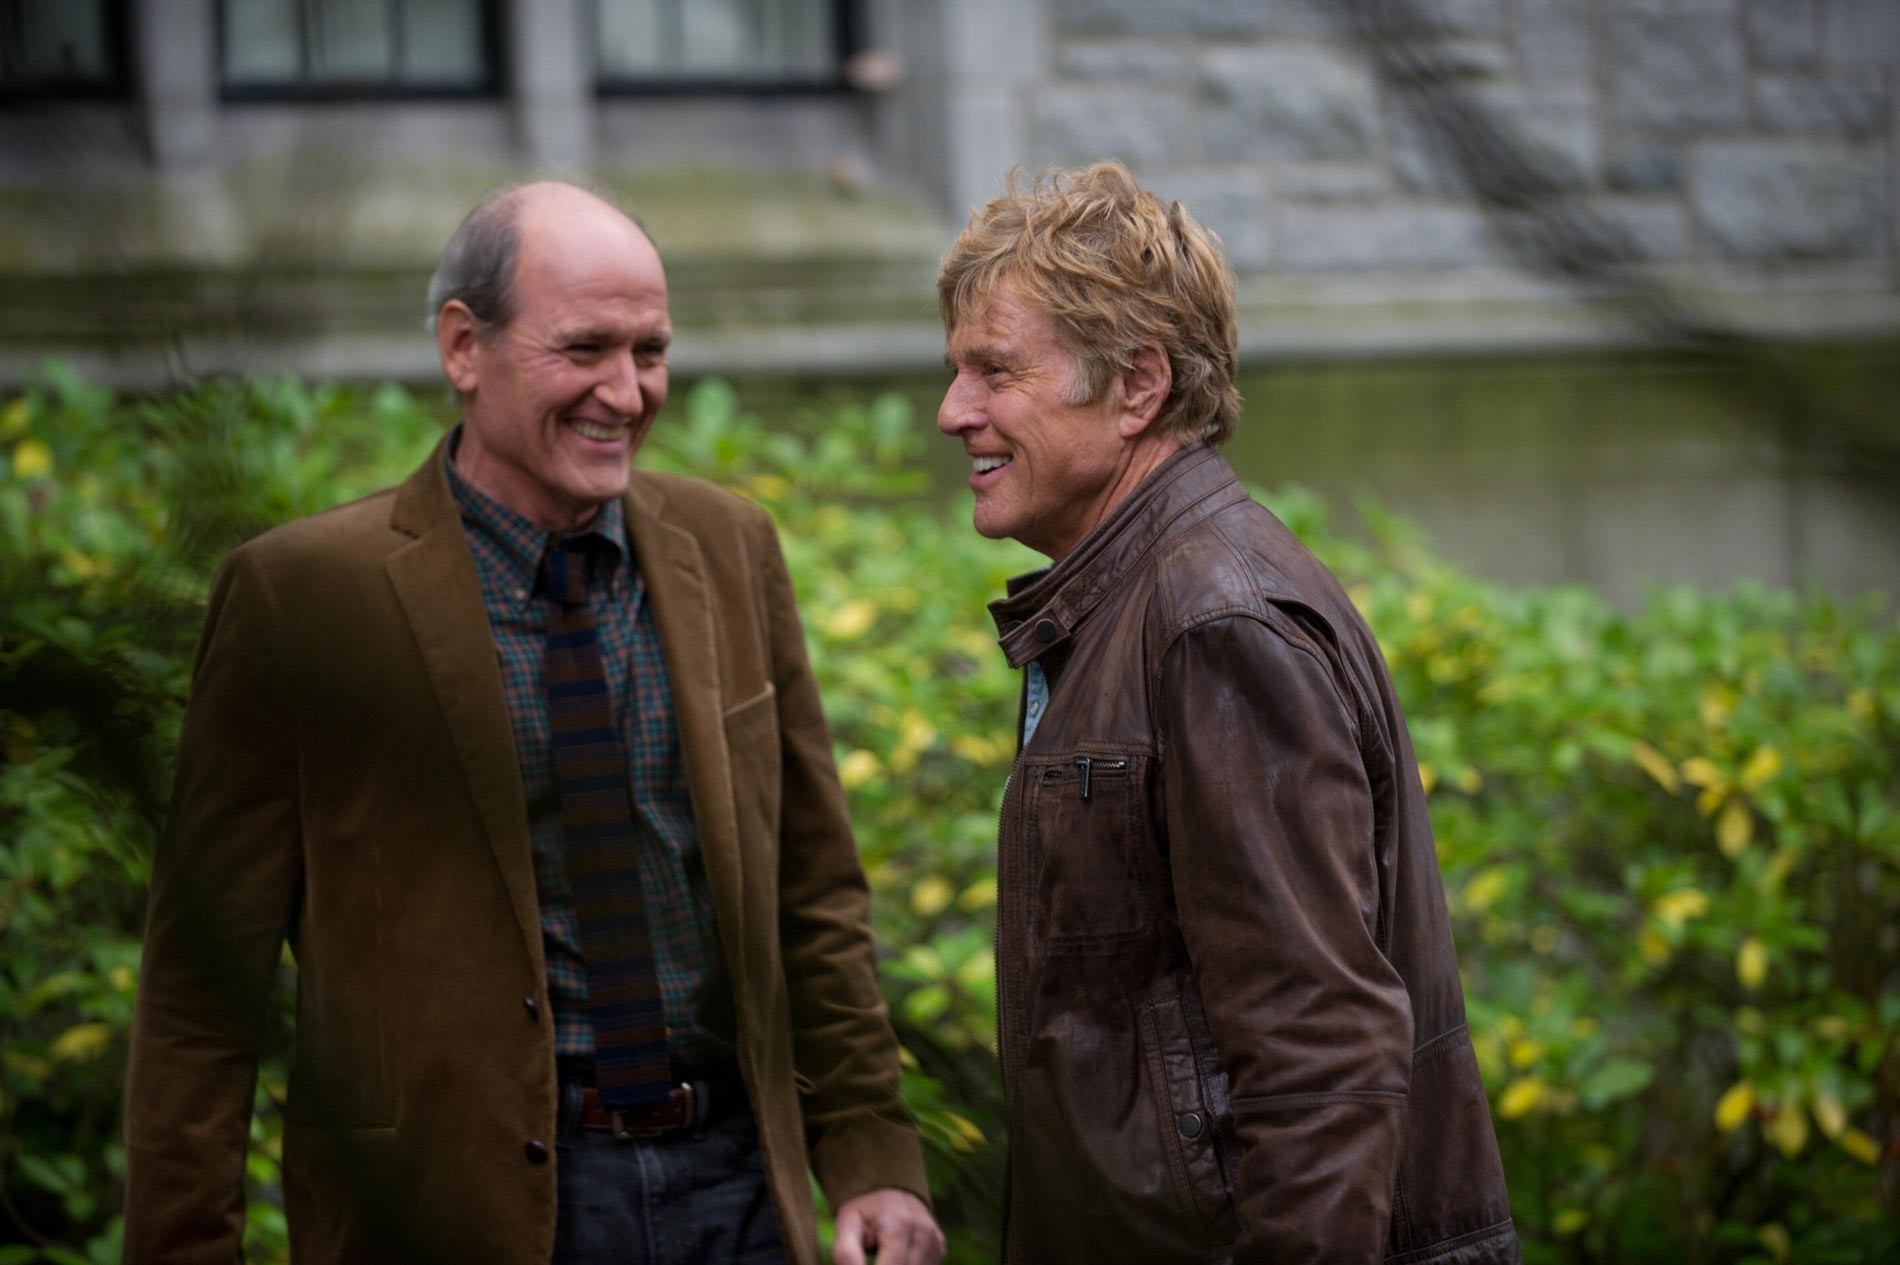 Richard Jenkins stars as Jed Lewis and Robert Redford stars as Jim Grant in Sony Pictures Classics' The Company You Keep (2013)